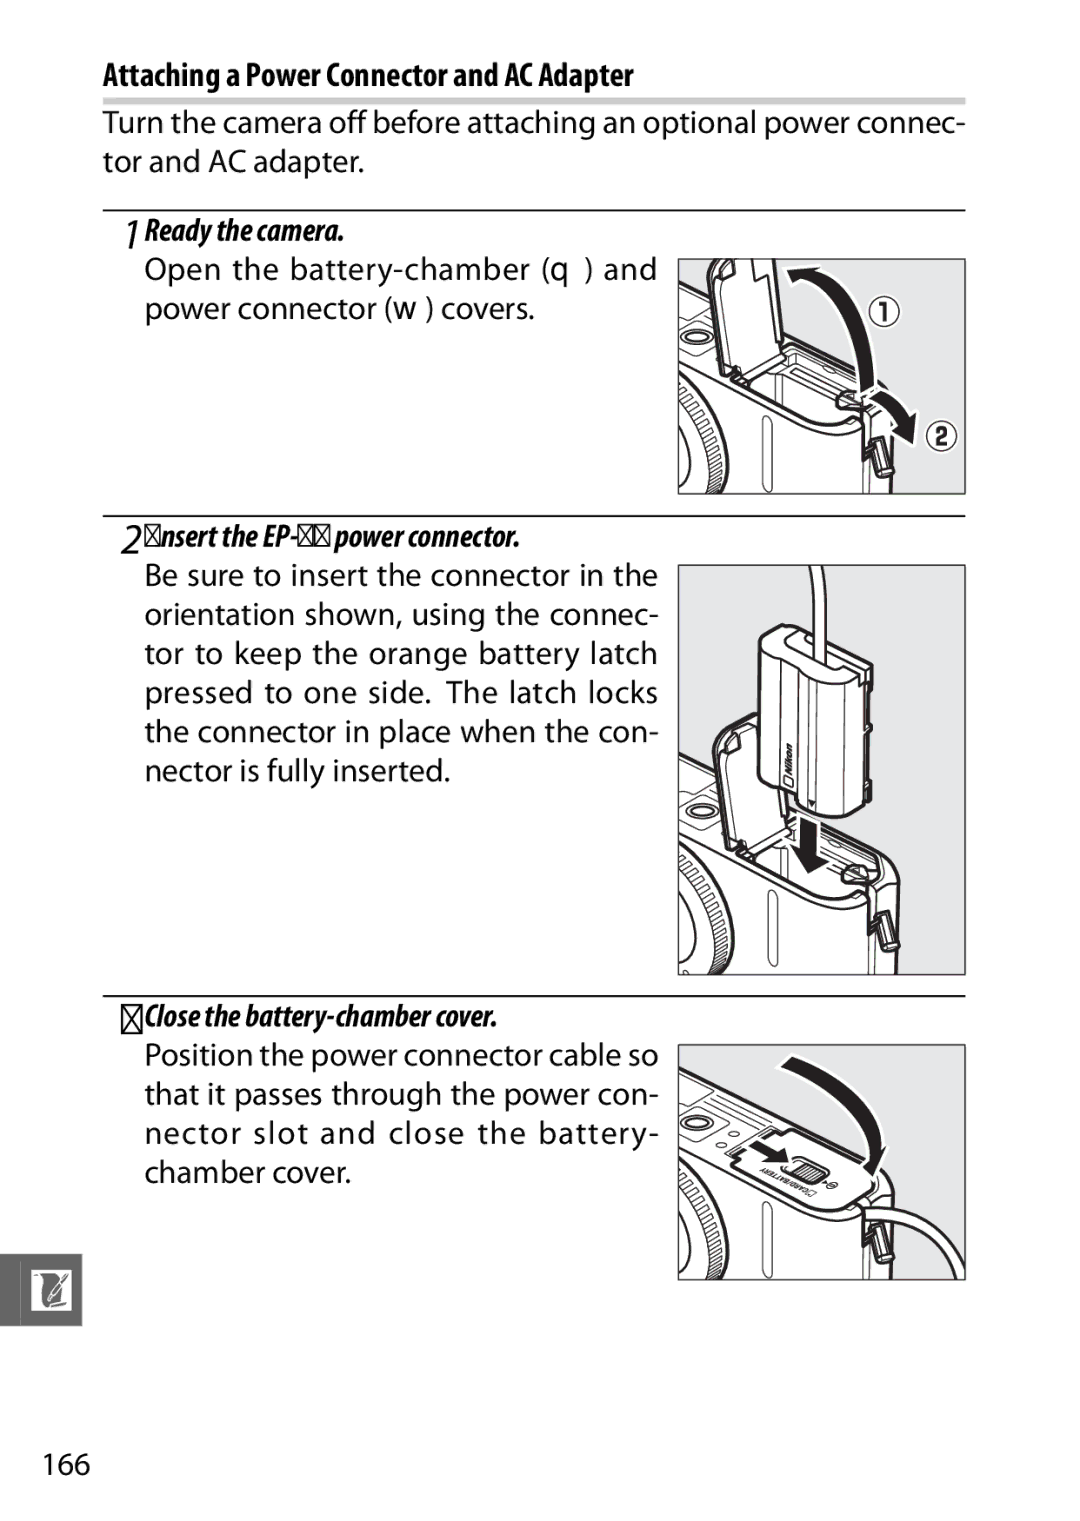 Nikon V1 manual Attaching a Power Connector and AC Adapter, Open the battery-chamber q and power connector w covers 